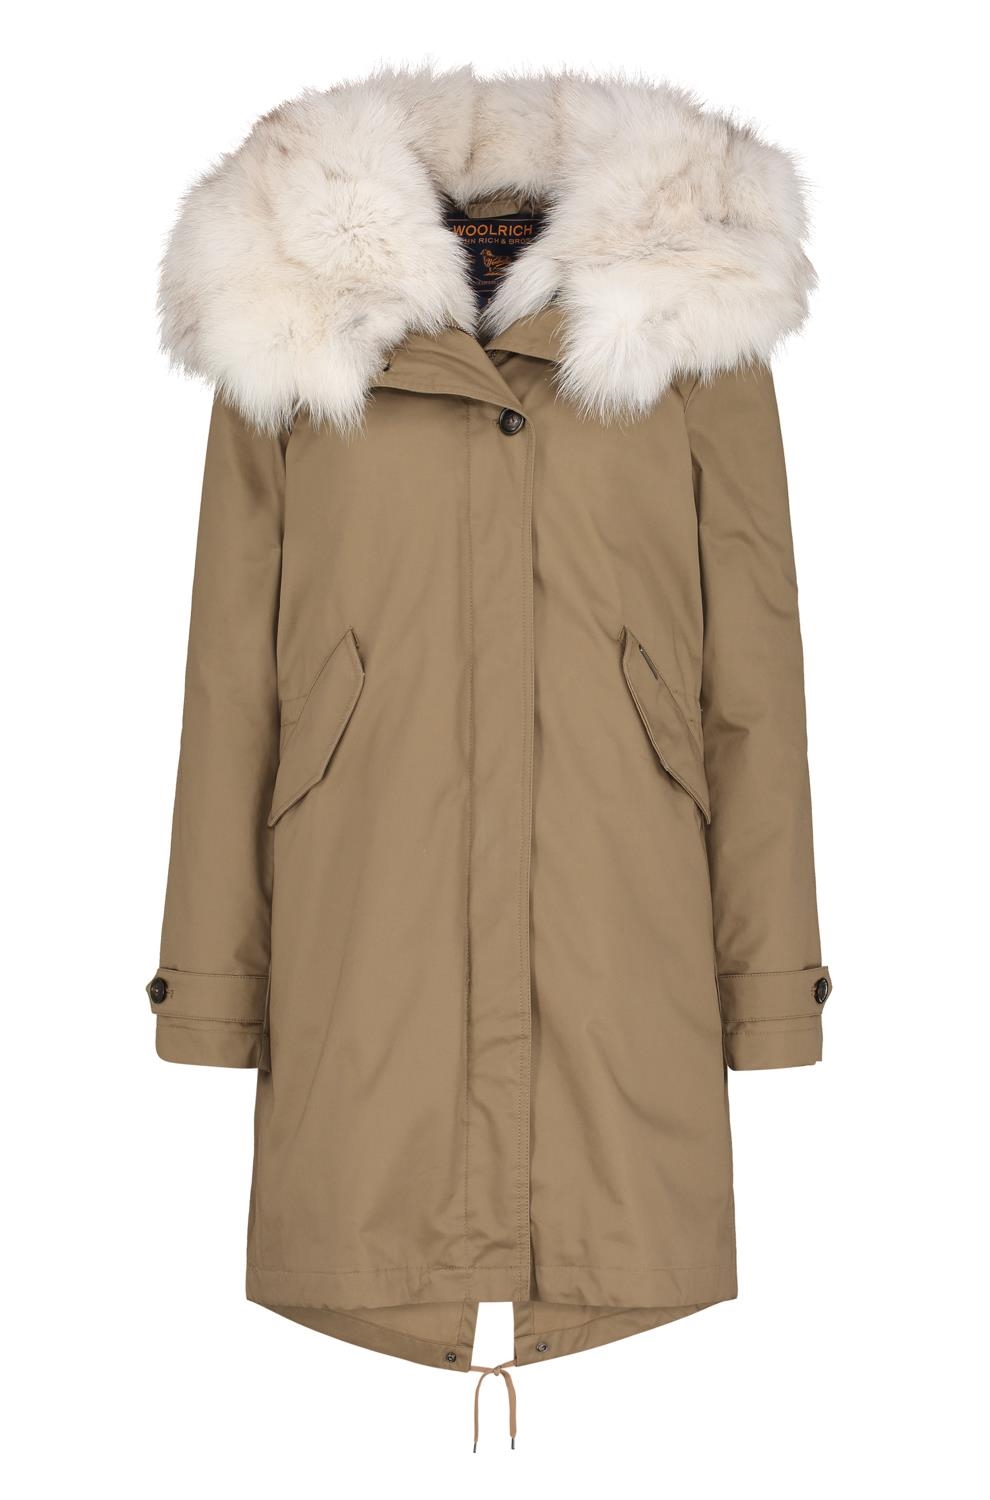 Woolrich Literary Fox Eskimo Coat in Taupe